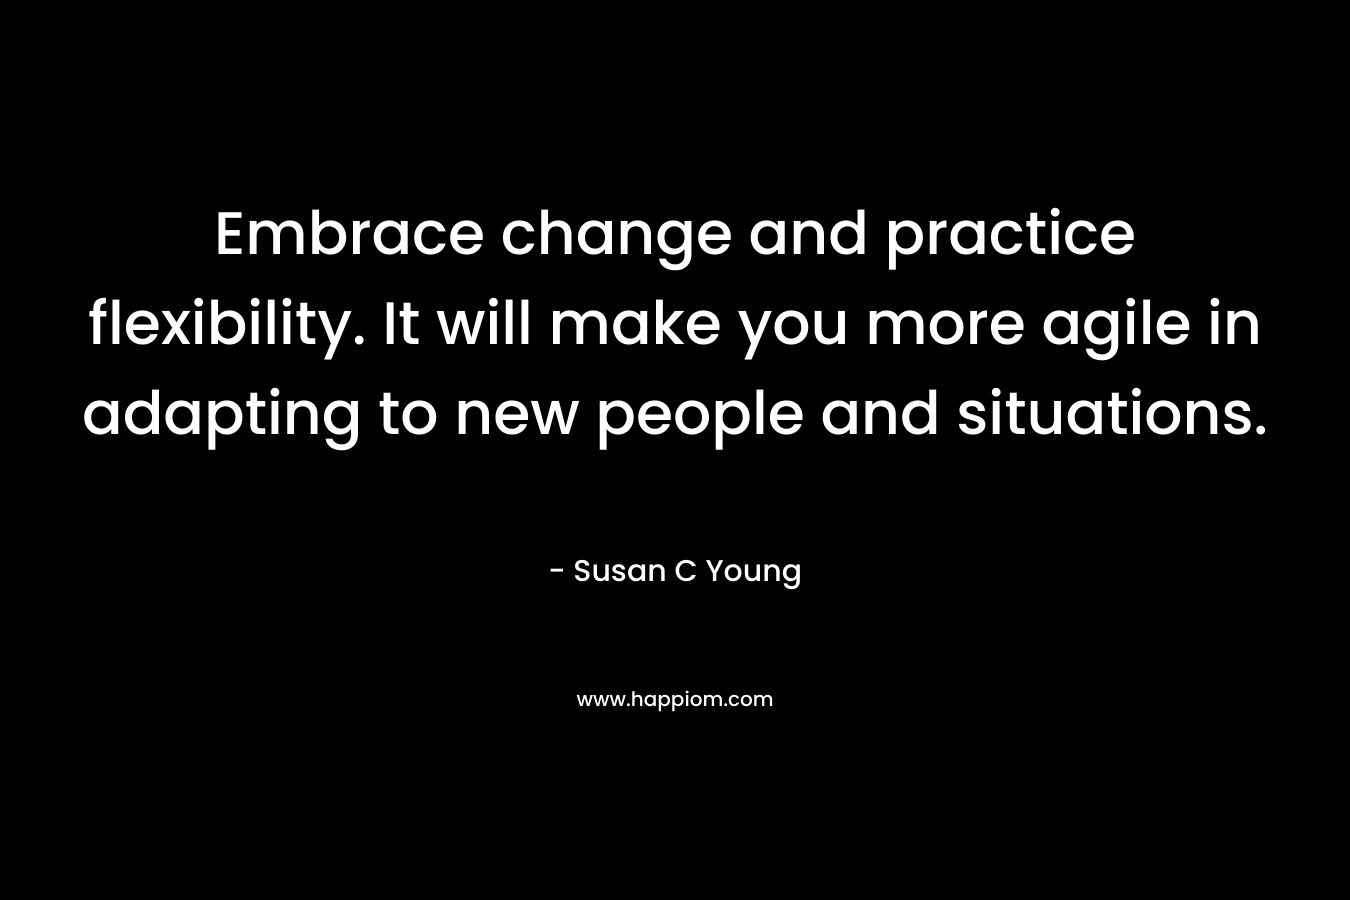 Embrace change and practice flexibility. It will make you more agile in adapting to new people and situations. – Susan C Young